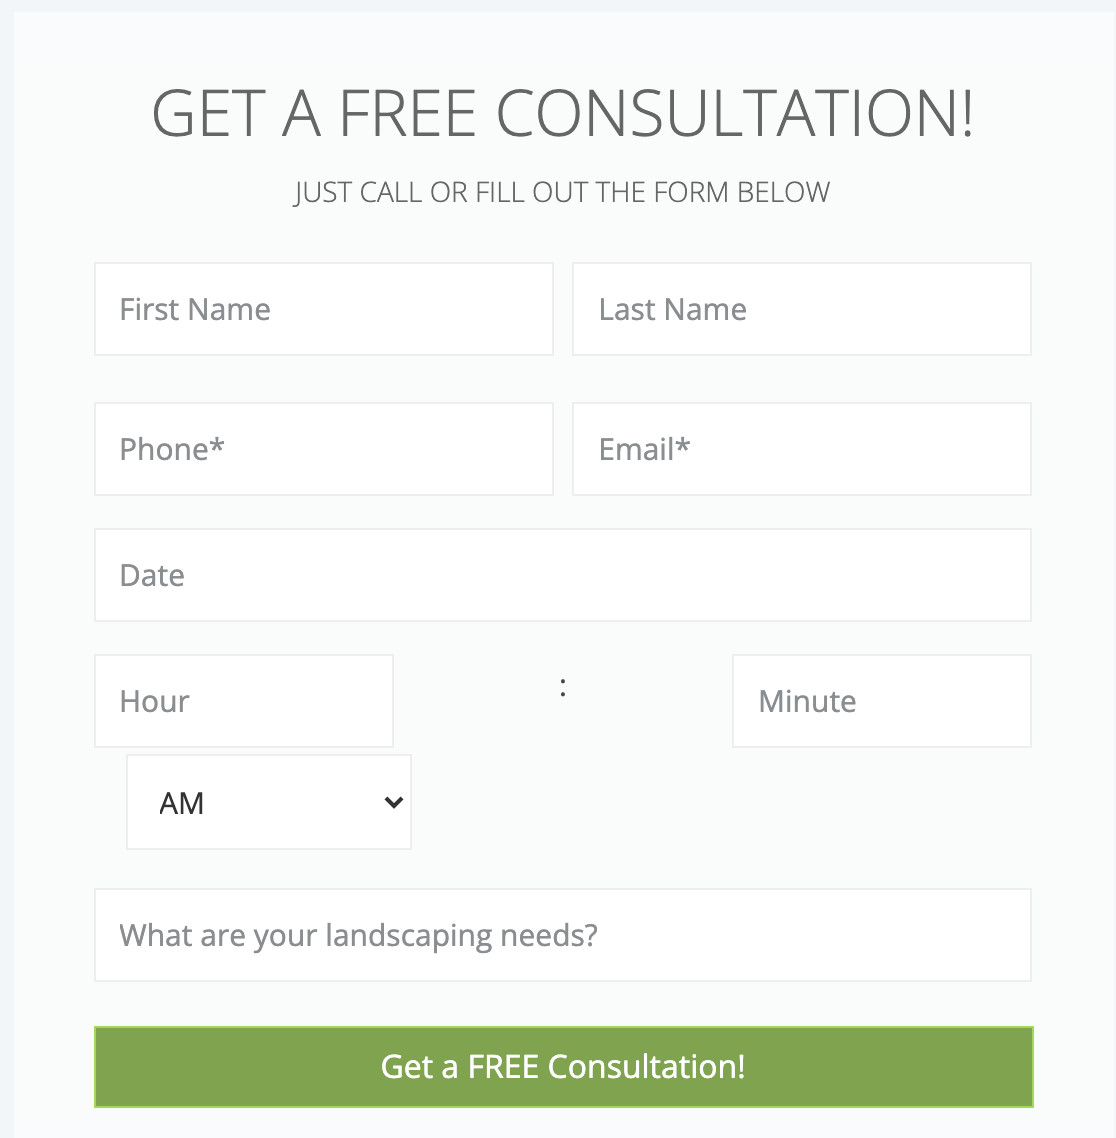 cllandscape.com offers free consultaions in exchange for your details - this also helps them define their customer.